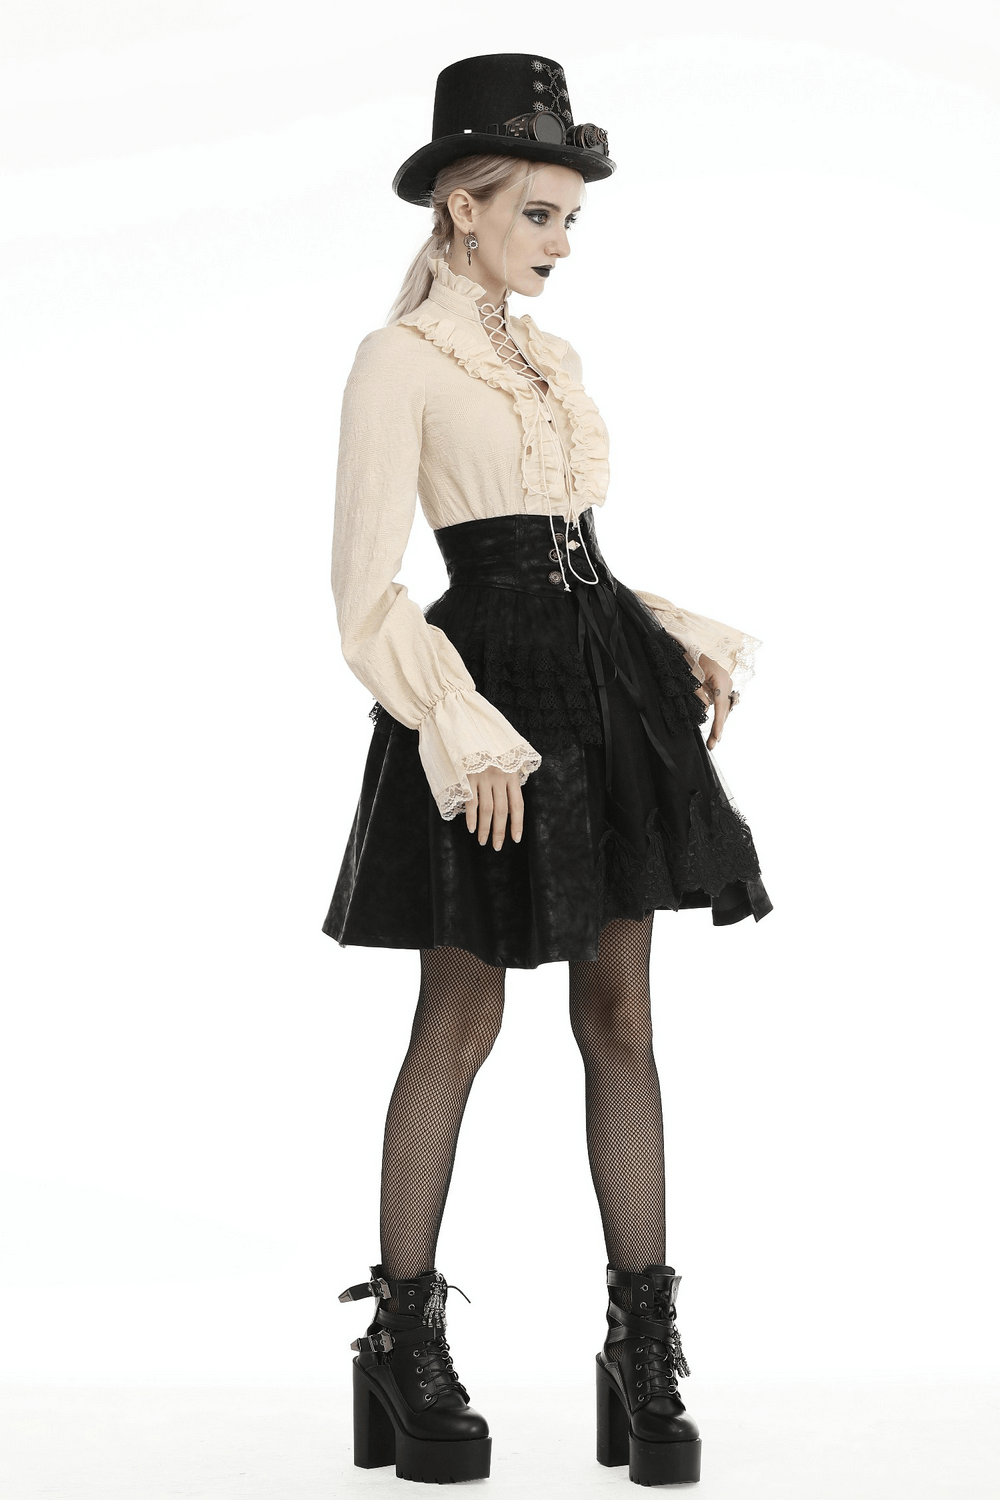 Steampunk PU Leather Skirt with Lace and Corset Lacing